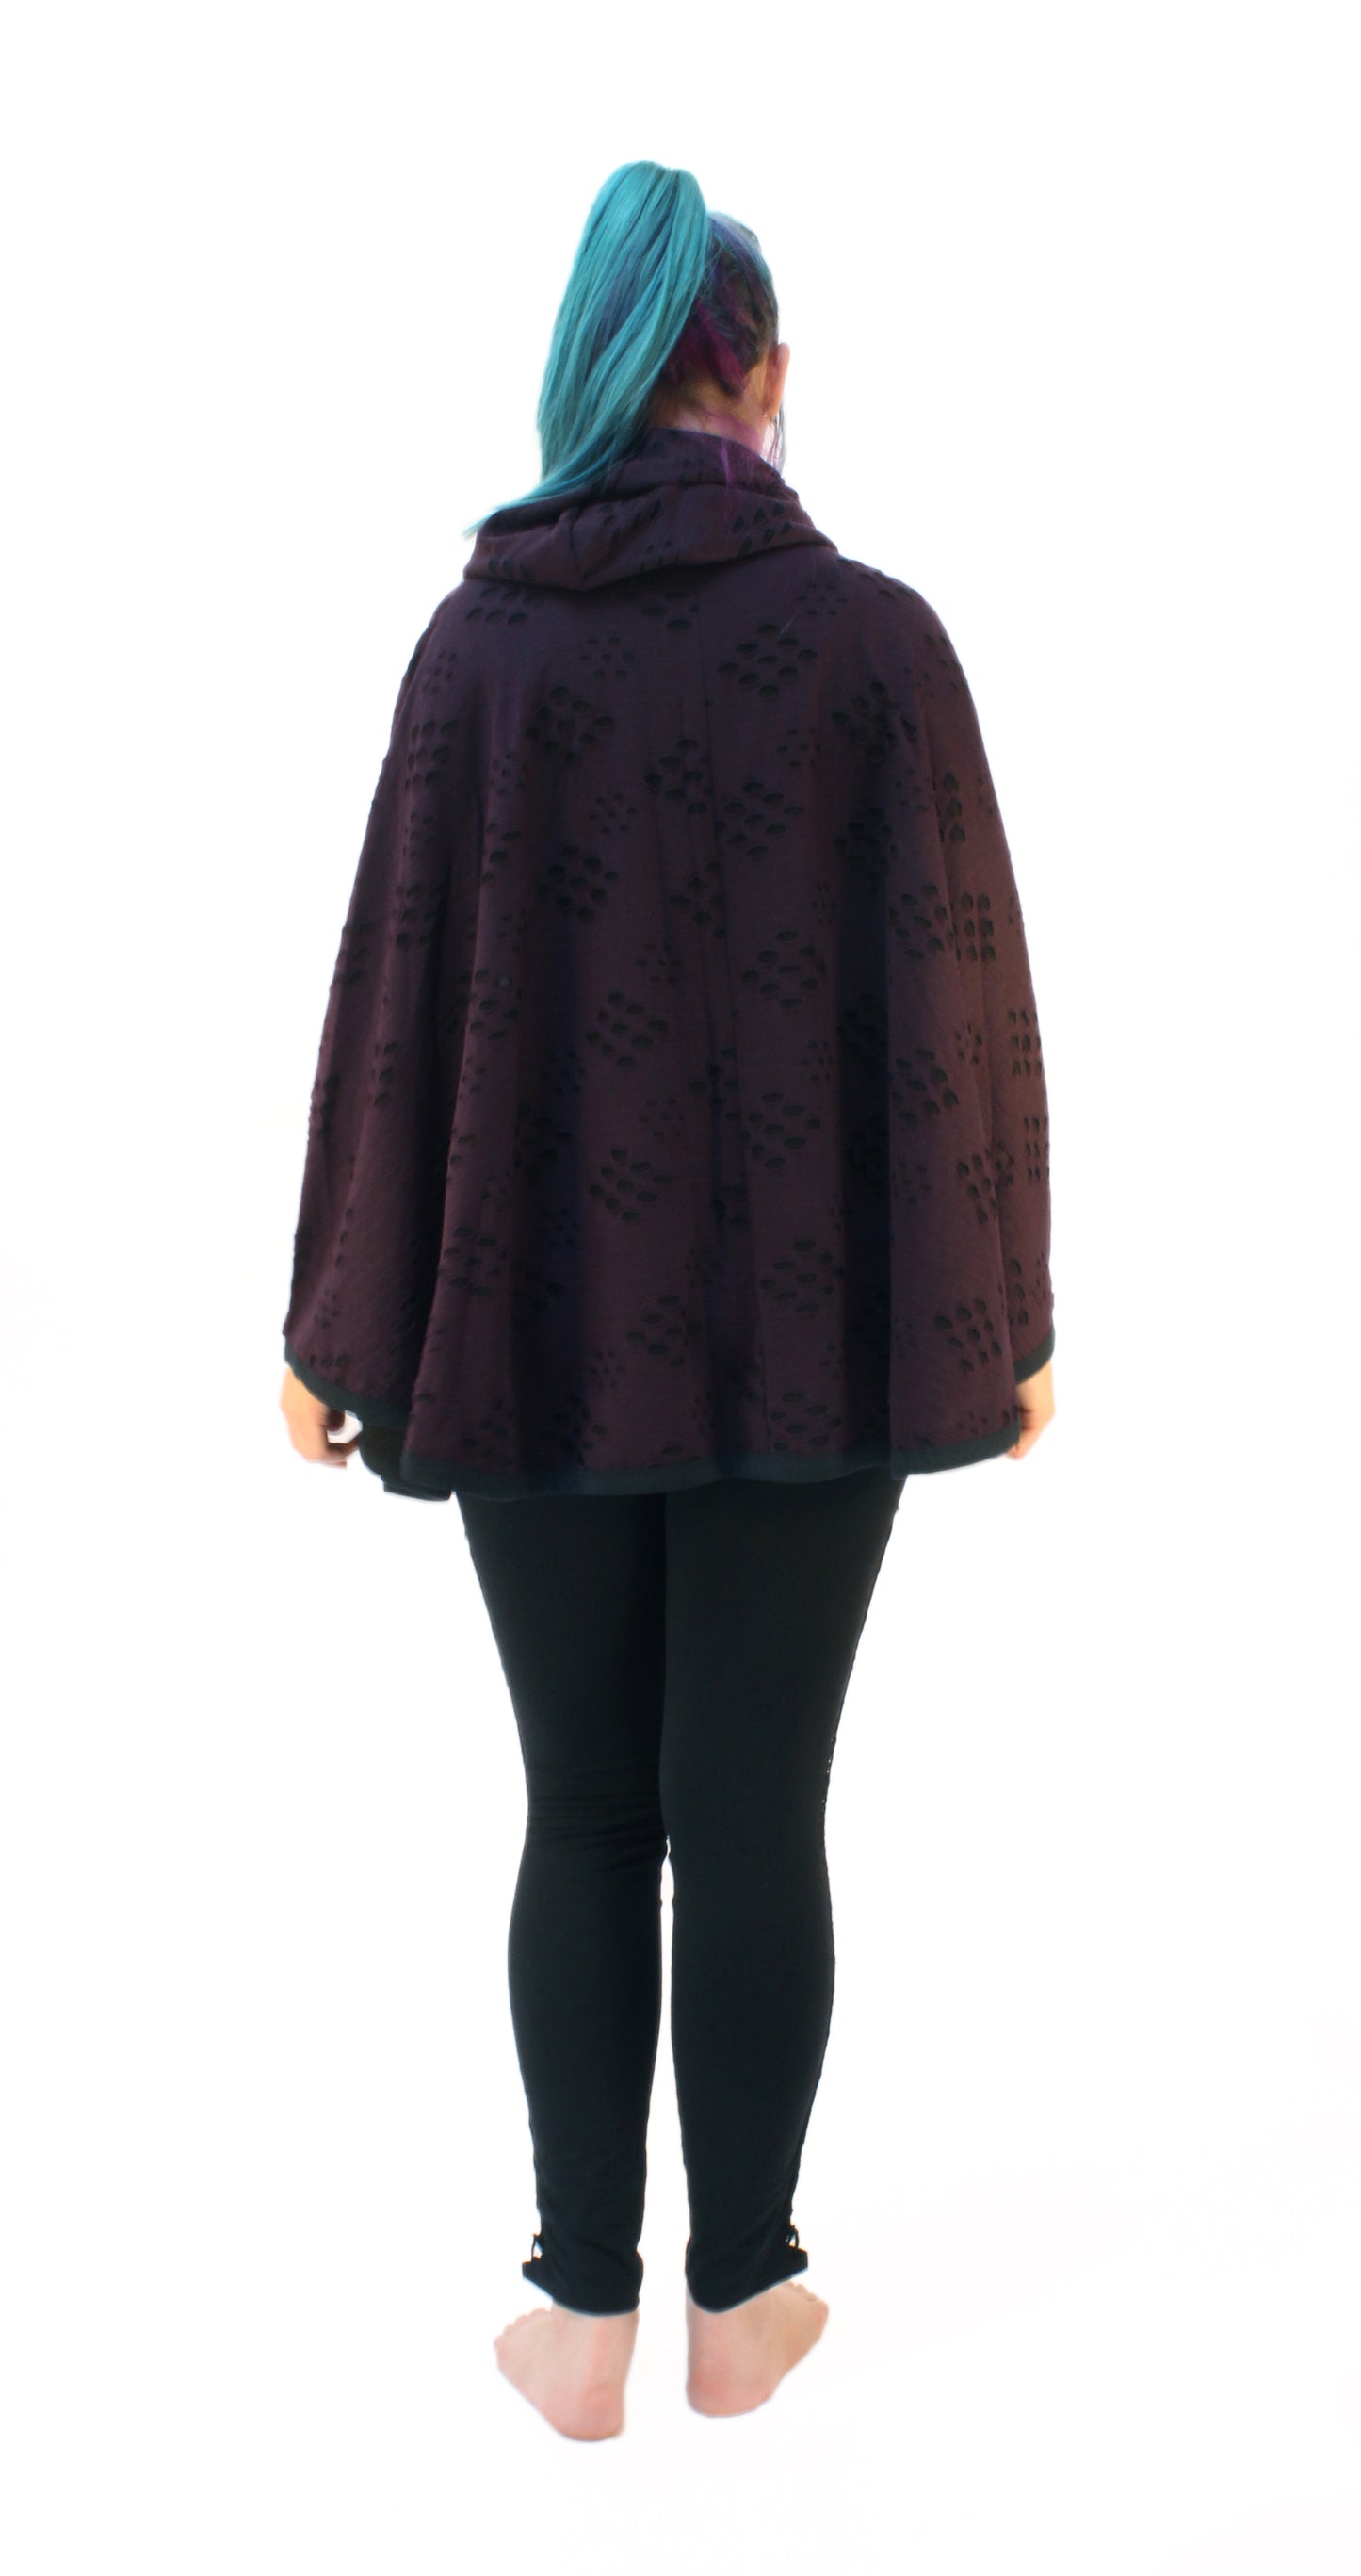 MR601 Oracle Poncho - Mishu Boutique